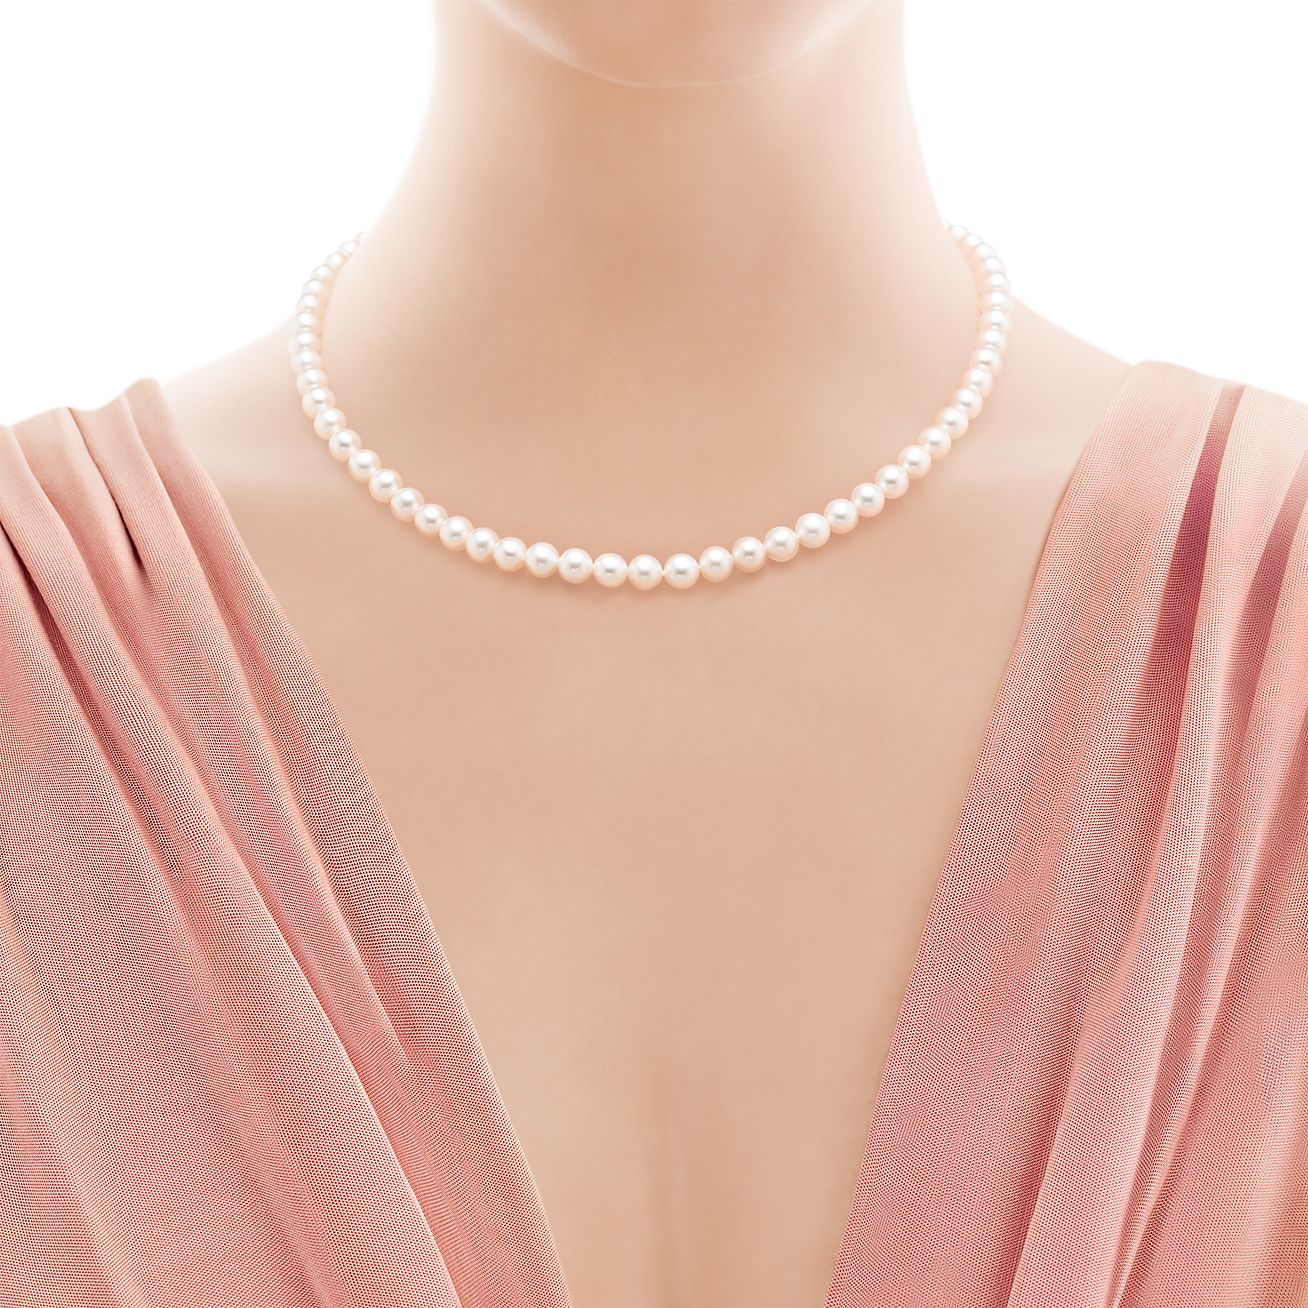 pearl necklace stores